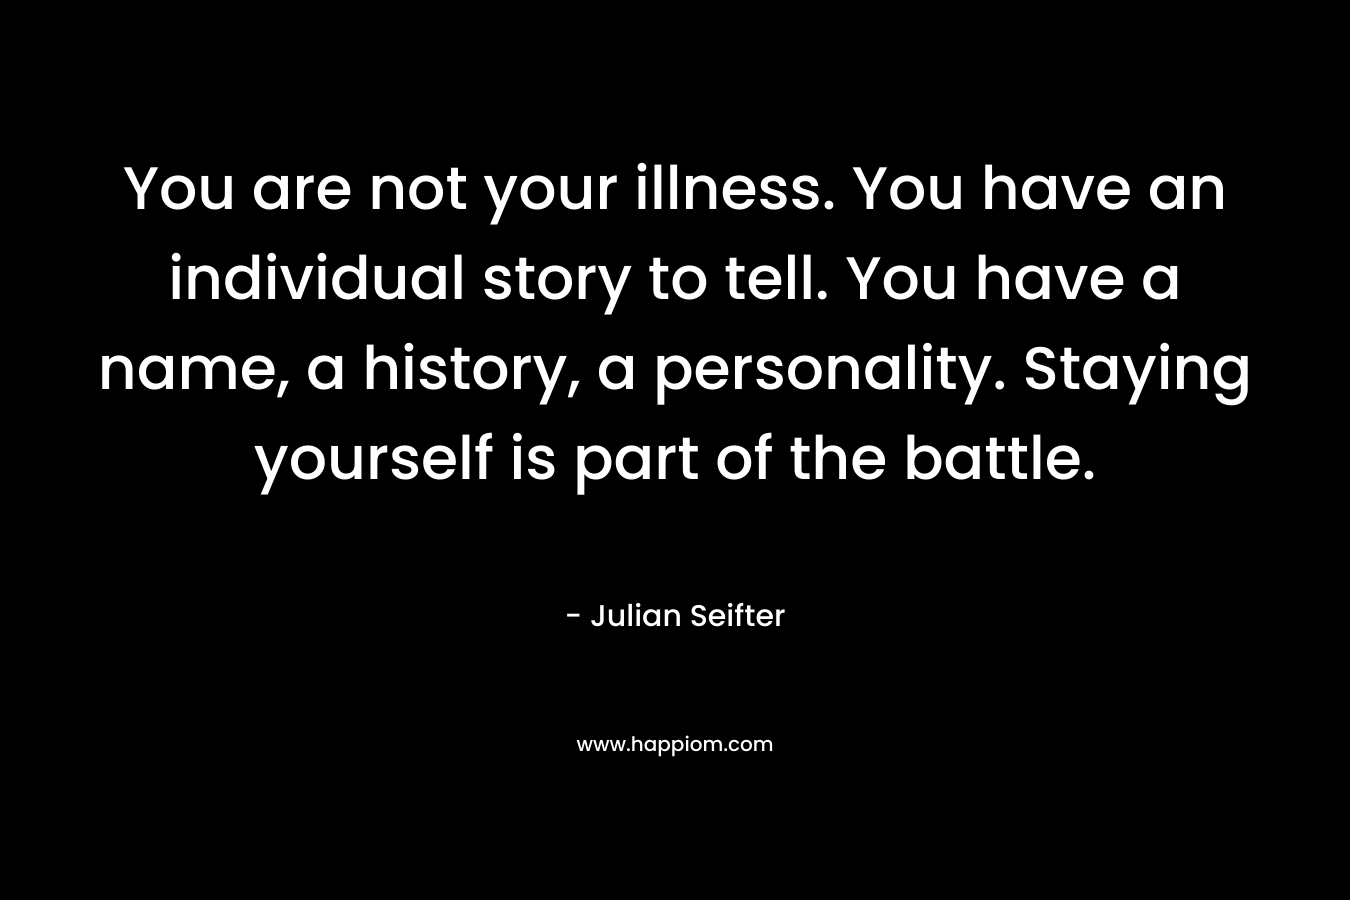 You are not your illness. You have an individual story to tell. You have a name, a history, a personality. Staying yourself is part of the battle. – Julian Seifter